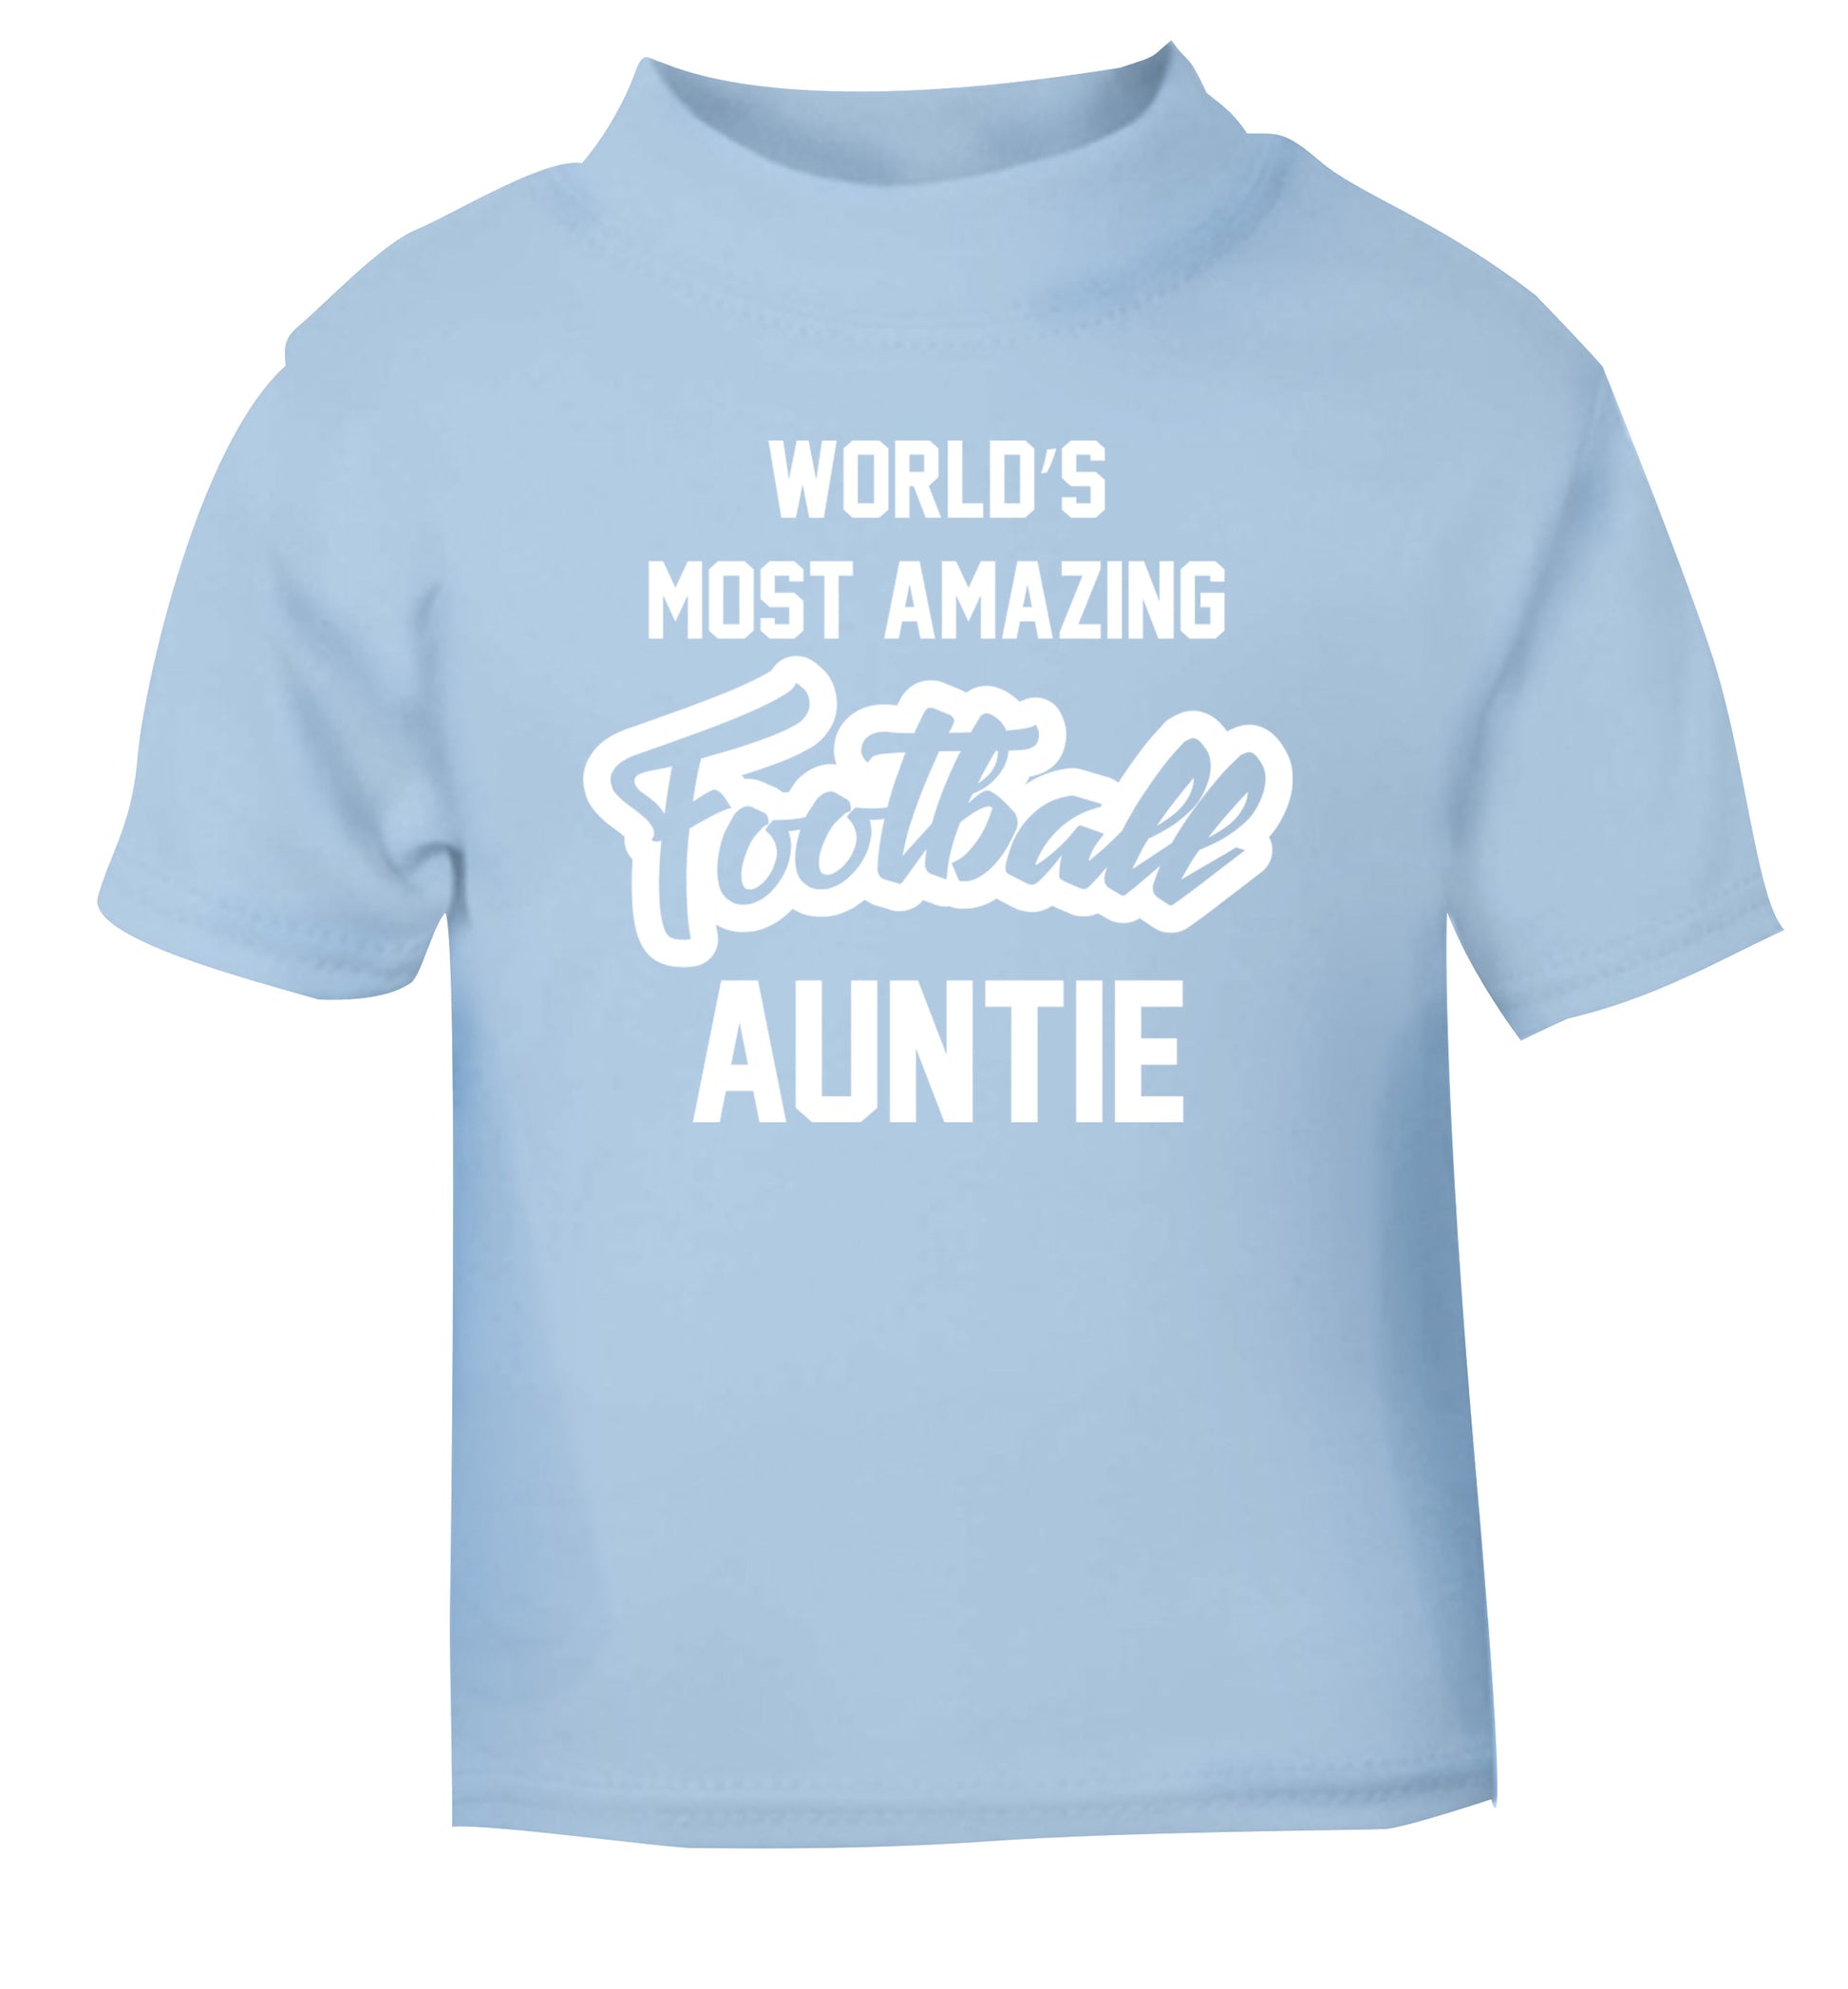 Worlds most amazing football auntie light blue Baby Toddler Tshirt 2 Years